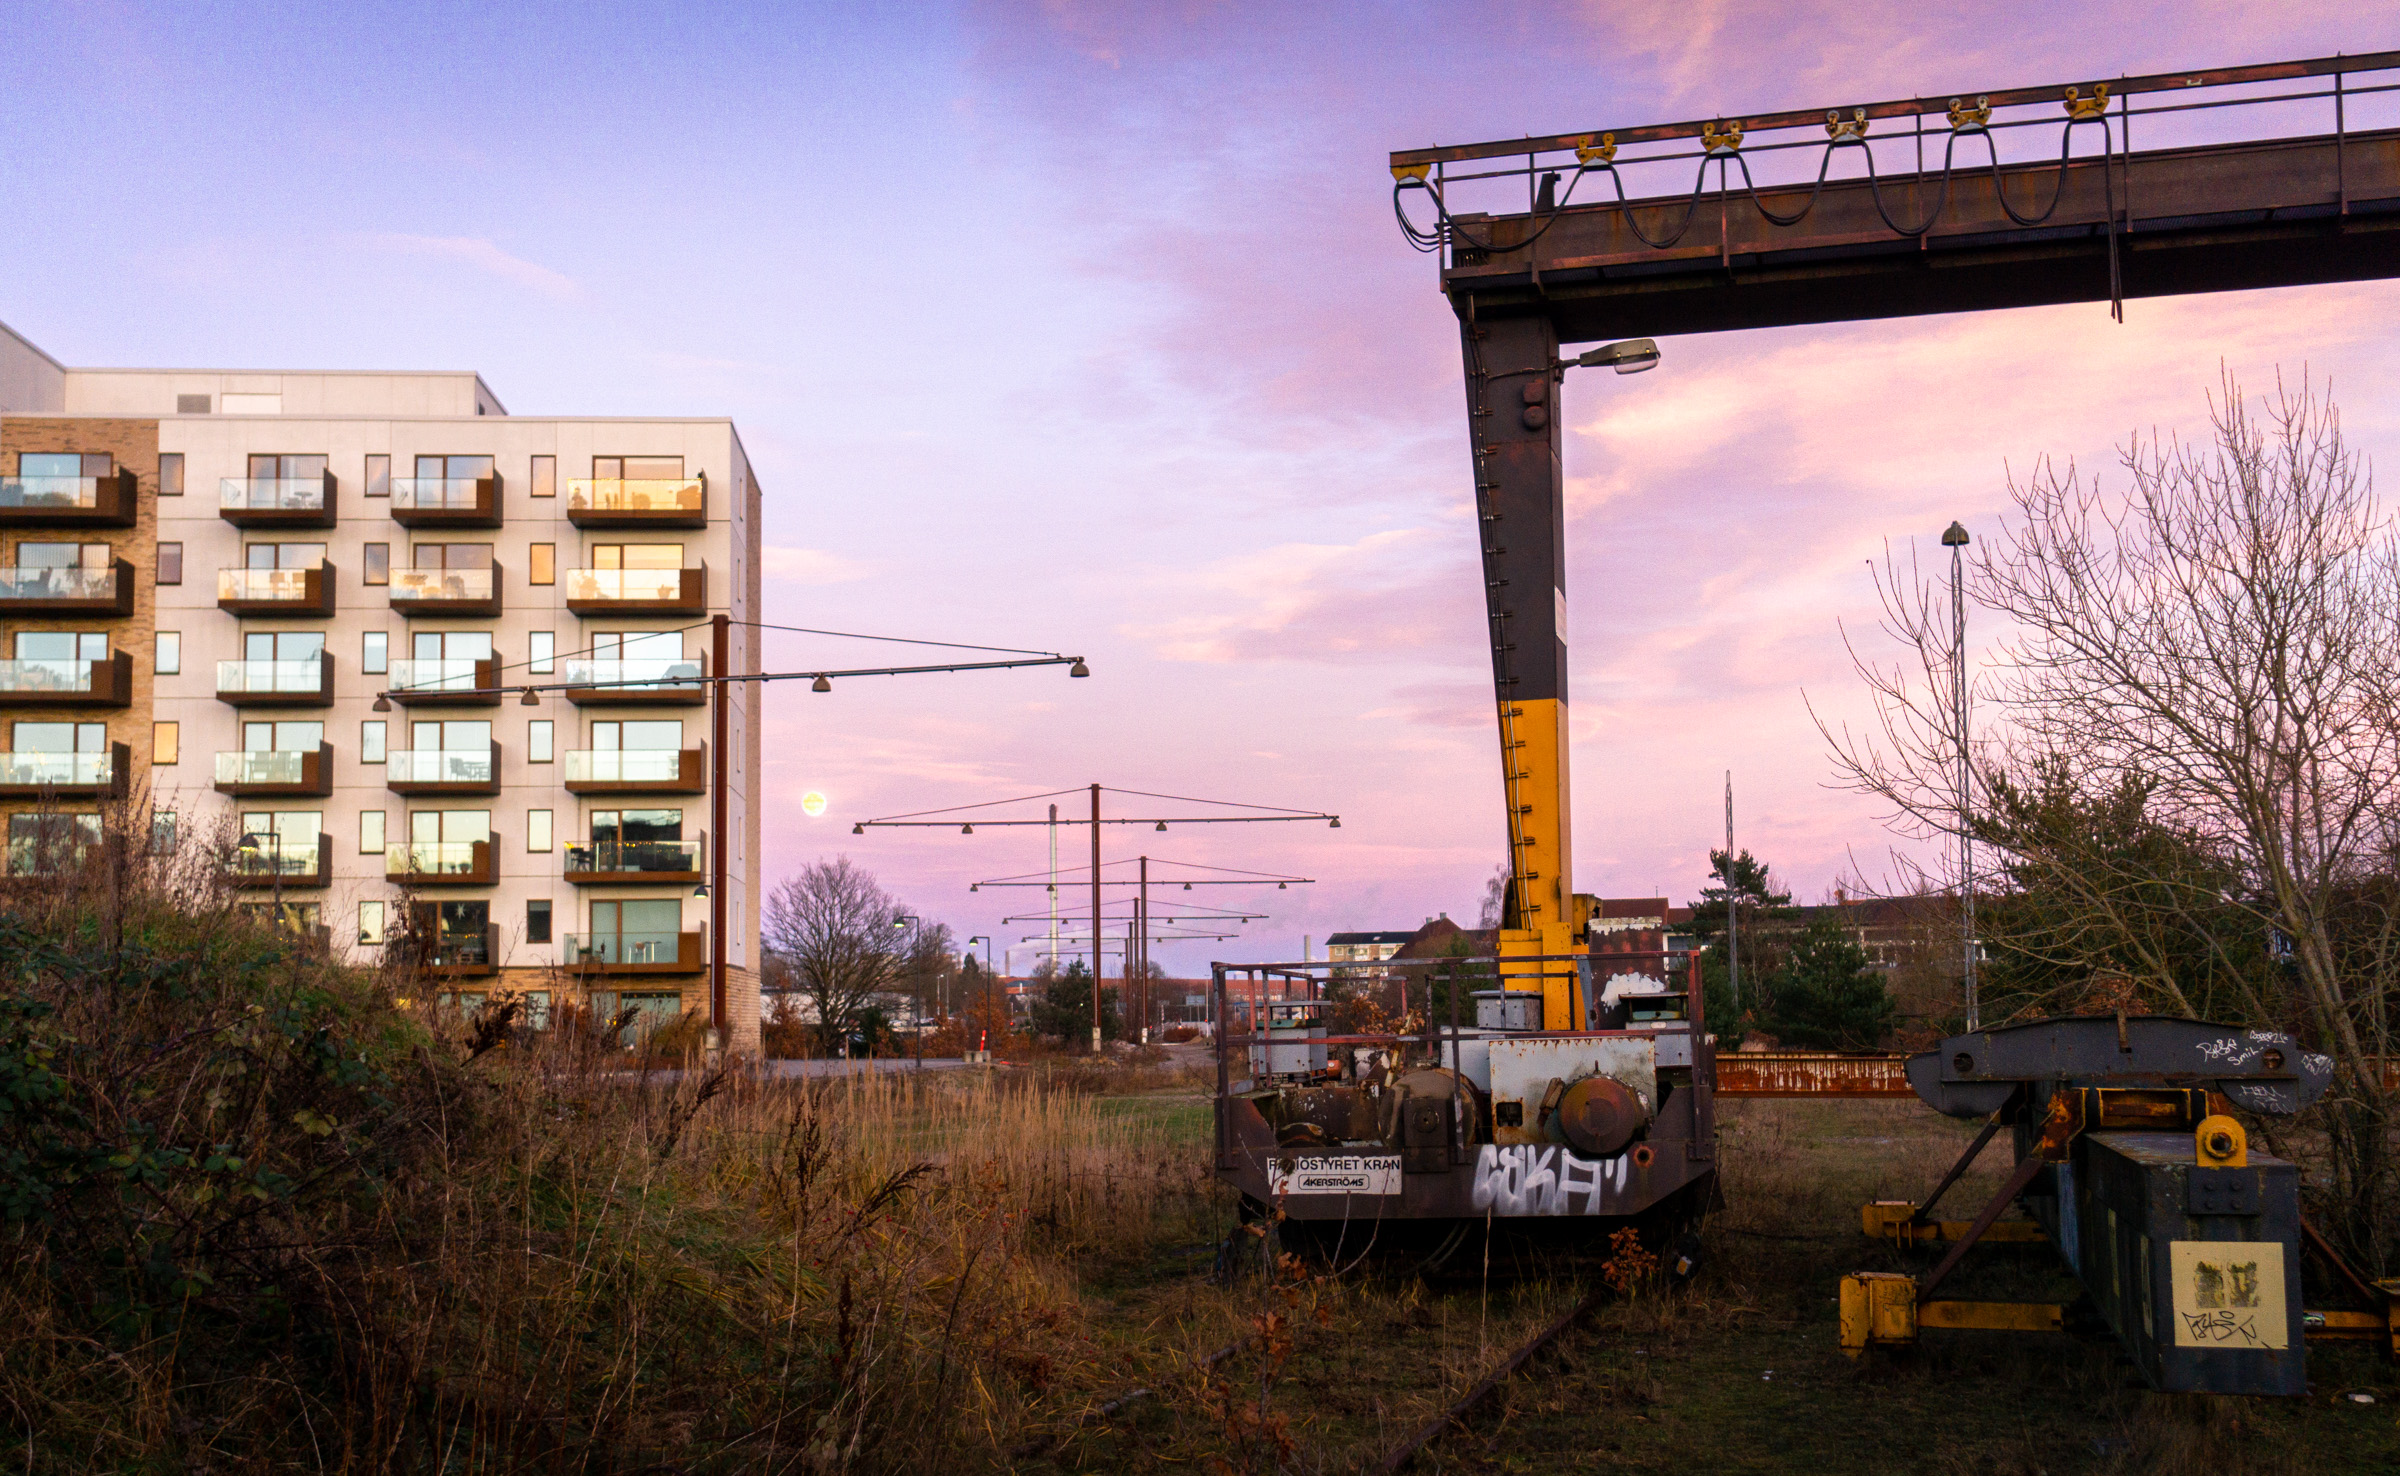 Sunset over an old rail yard, with a modern building on the left